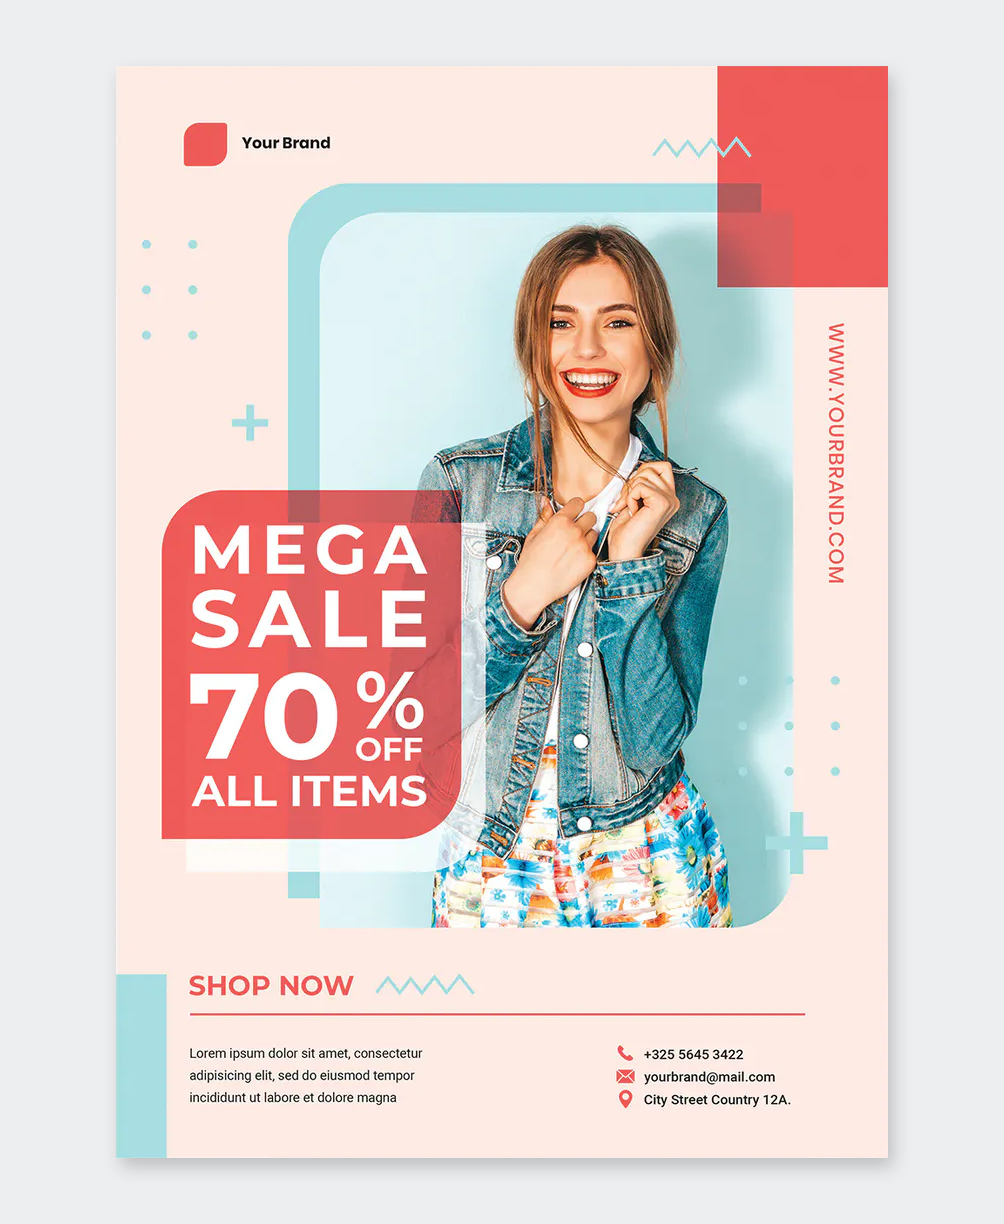 ProfessionaL Summer Fashion Sale Flyer Template